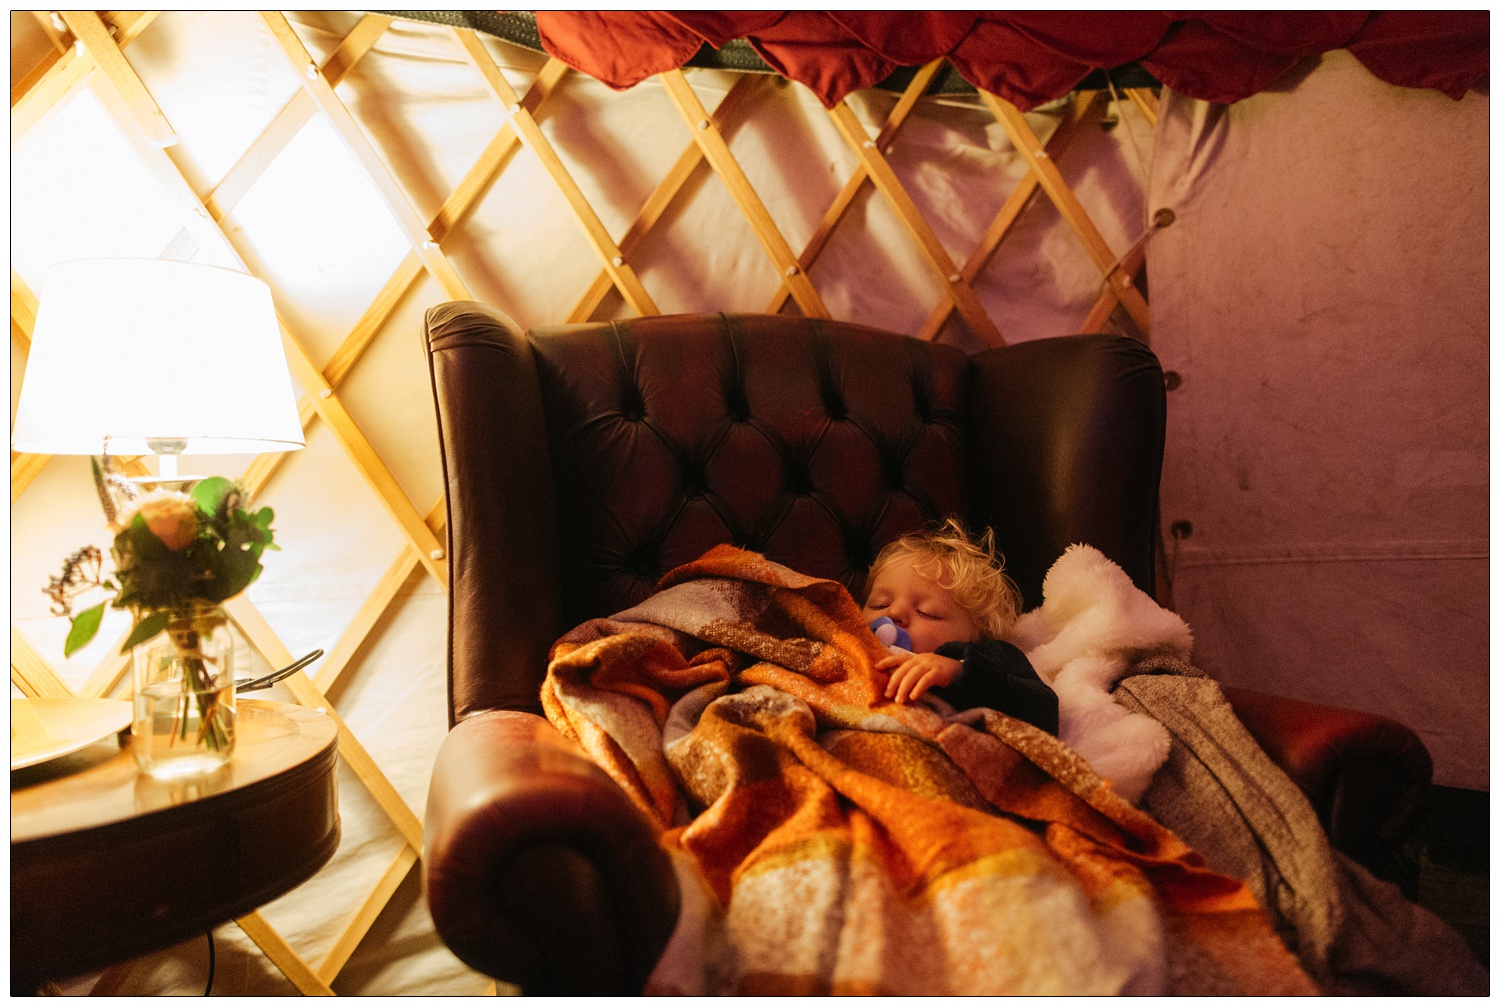 A toddler boy with blonde hair is asleep in an armchair at a wedding.